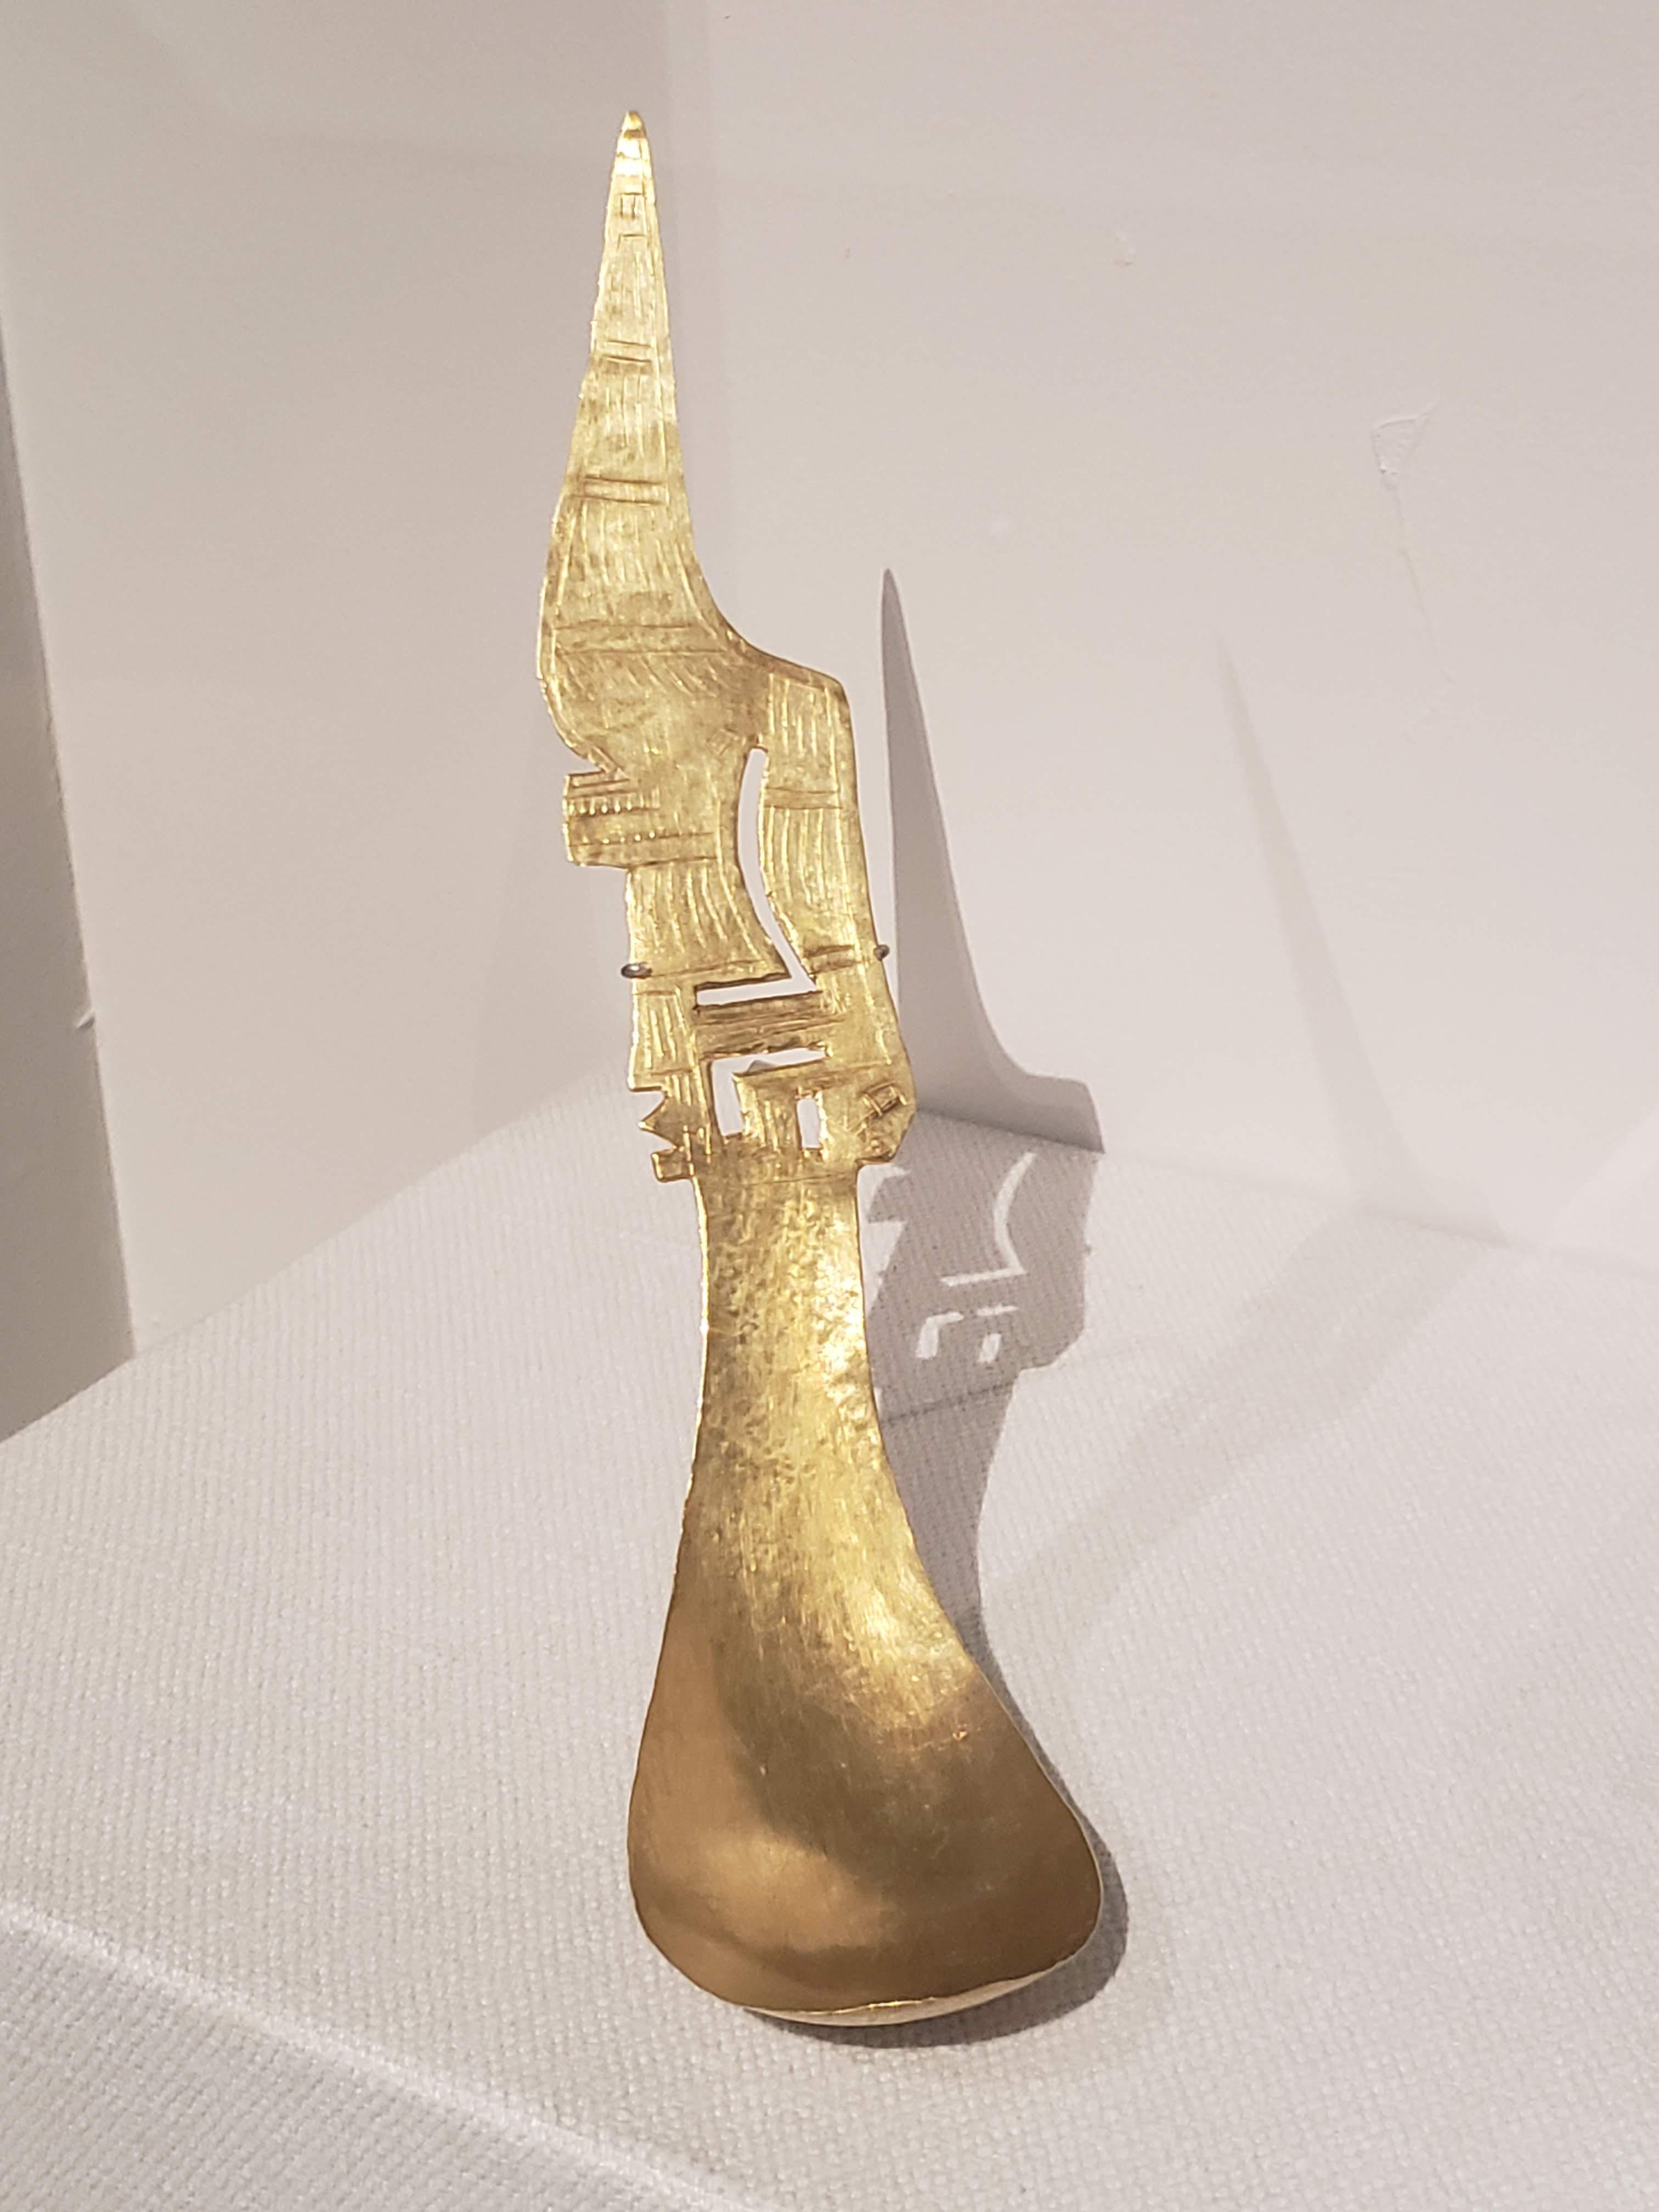 Spoon made from tumbaga, a gold-copper alloy. Yotoco goldwork style, Calima region, Colombia, ca. 100-1200 AD. Seen on loan to LACMA from Museo del Oro, Bogotá.jpg